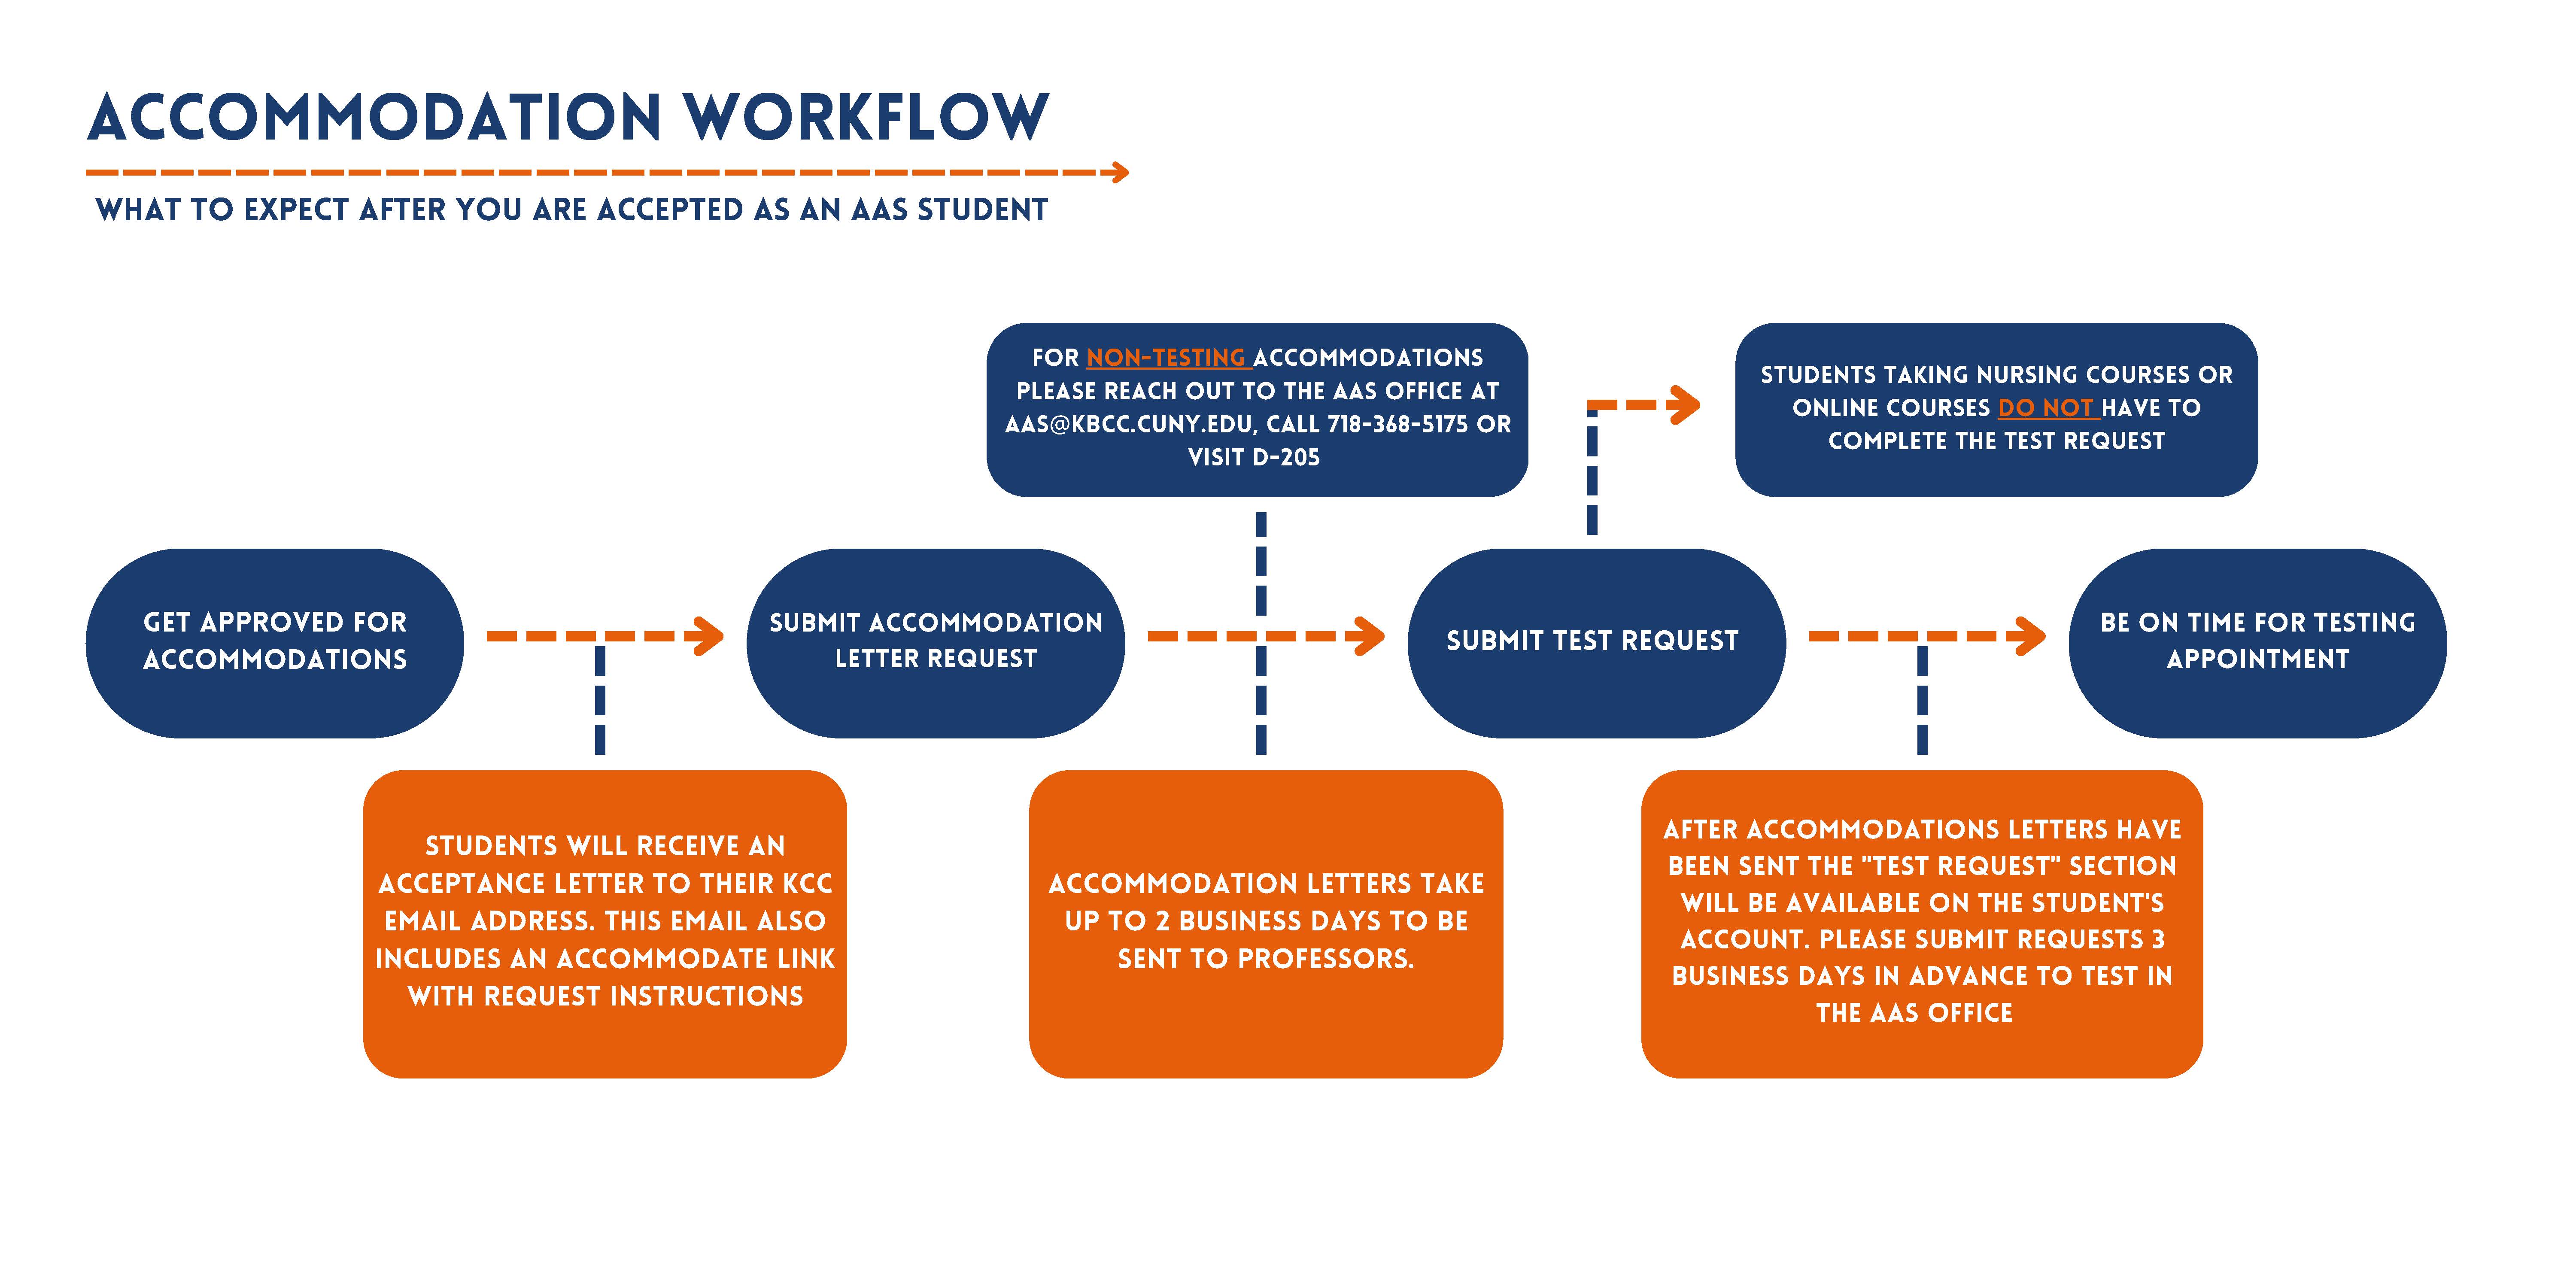 Accommodation Workflow of Using Testing Accommodations as an AAS Student